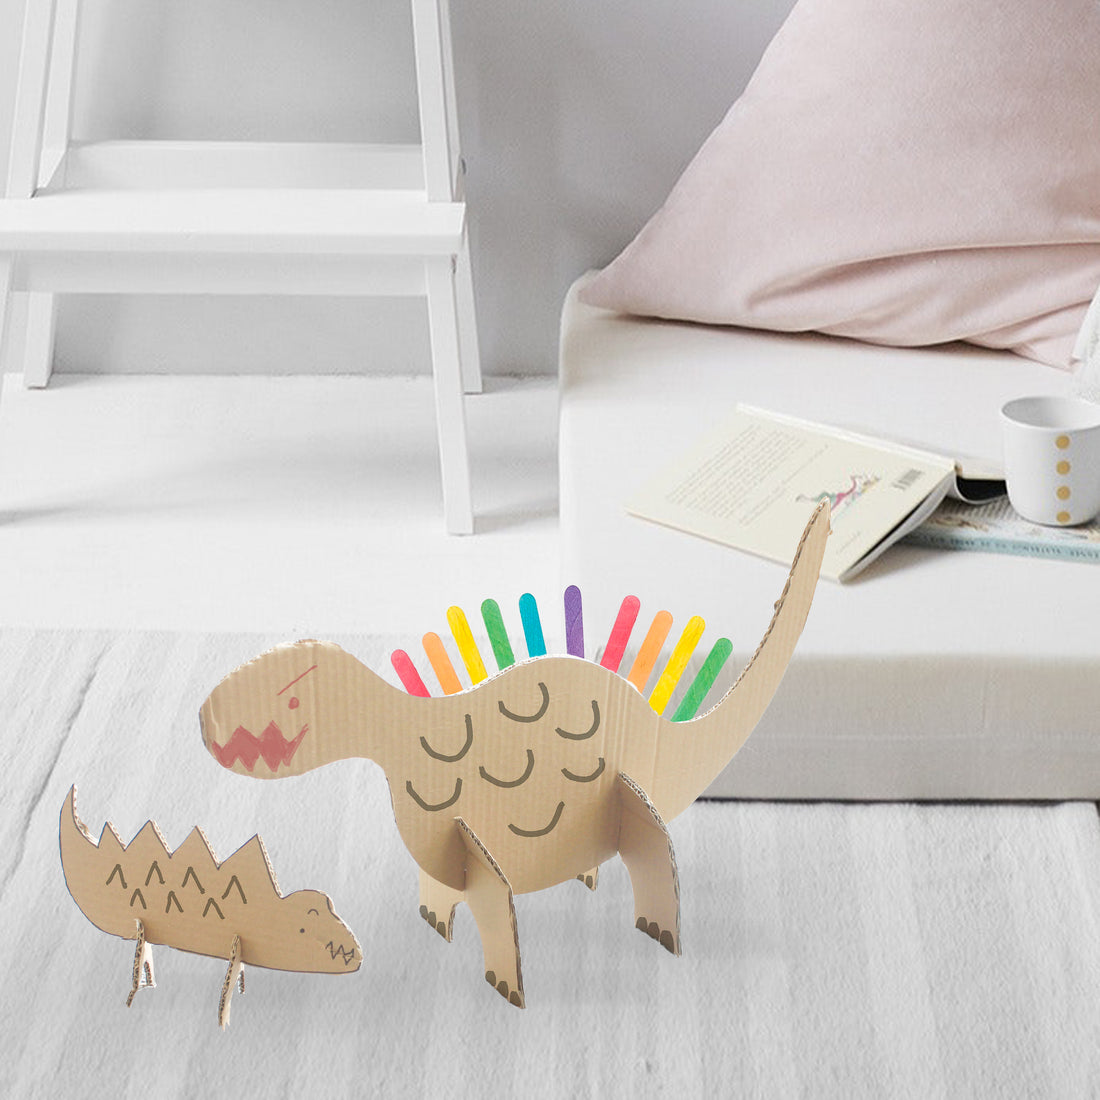 DIY Craft: Make a Fun Dinosaur Standee With Your Little Ones